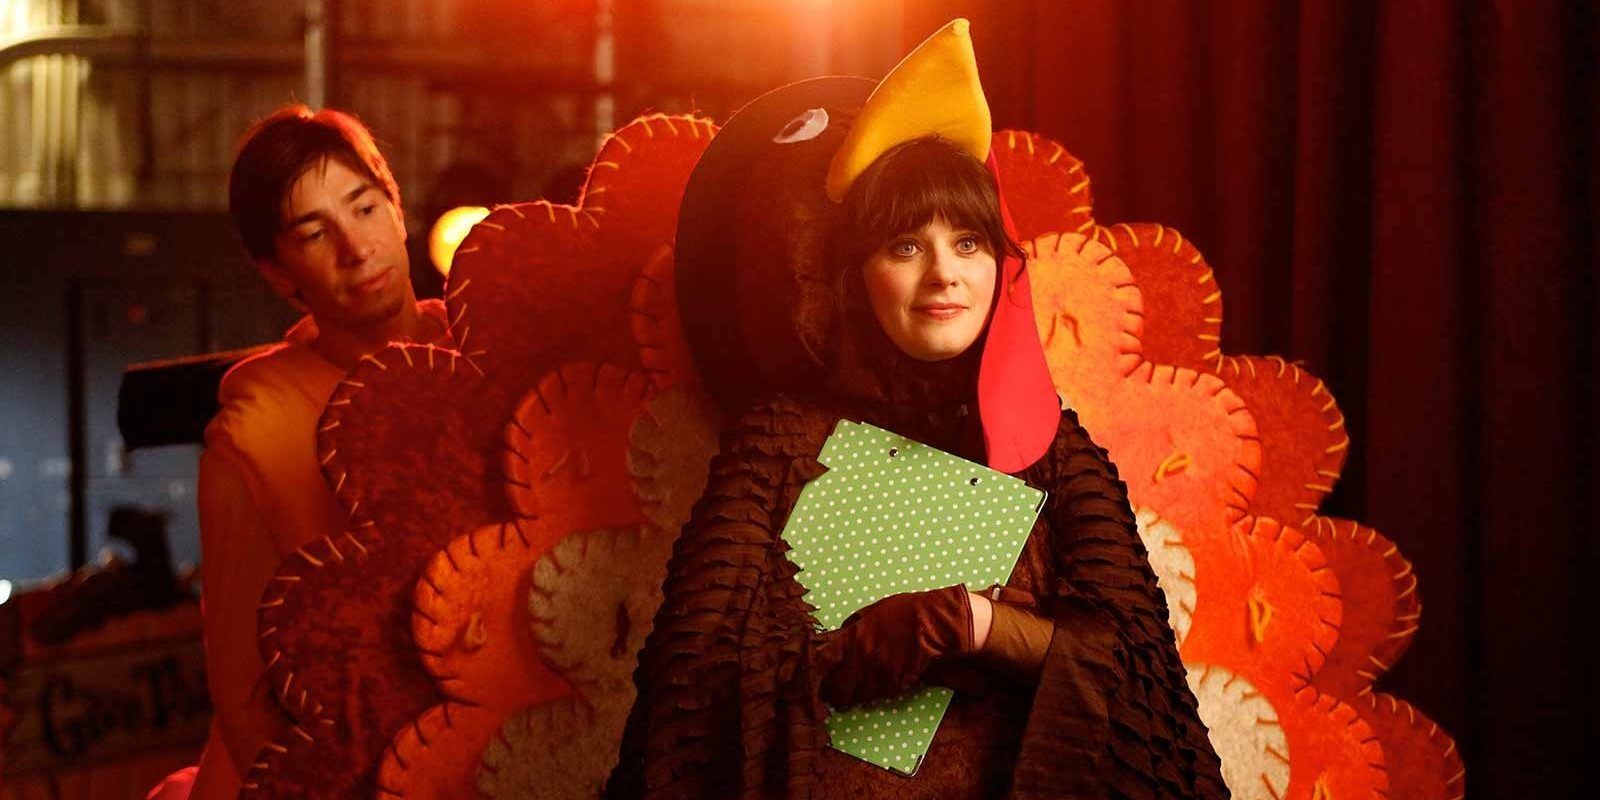 Jess dressed as a turkey with Paul behind her in New Girl